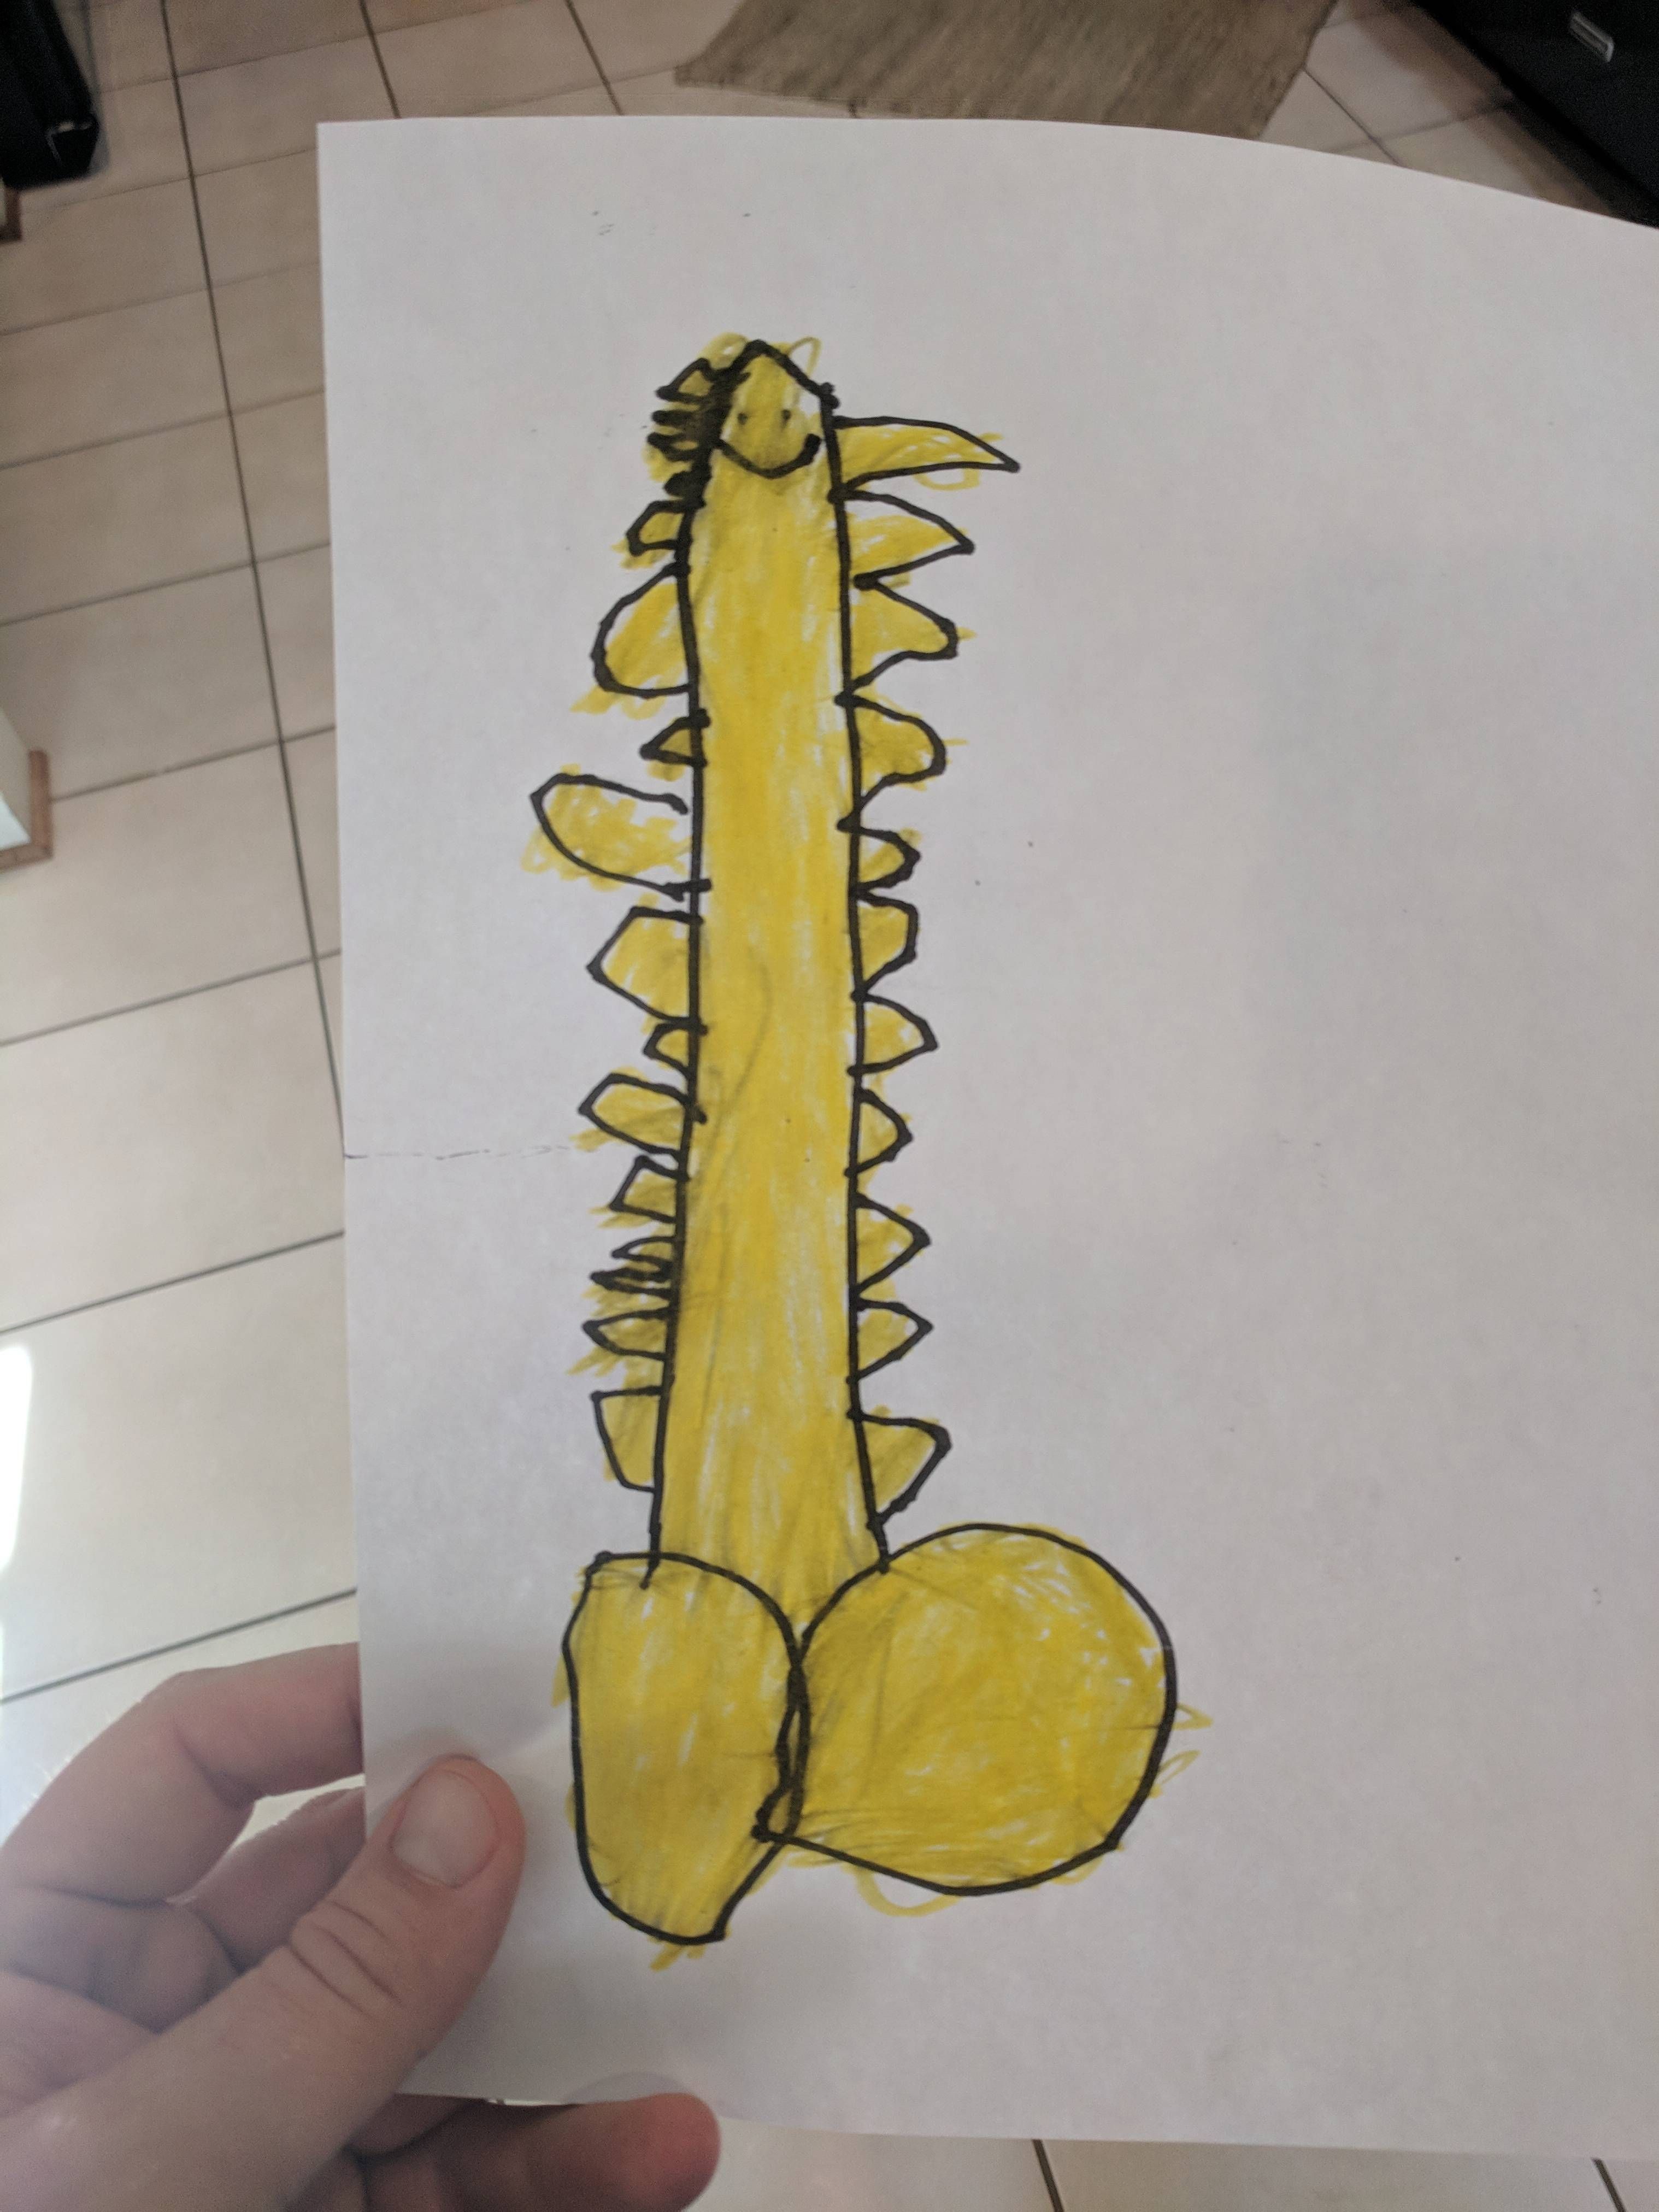 My 4 year old got into drawing this weekend...he calls this masterpiece "The Bee"